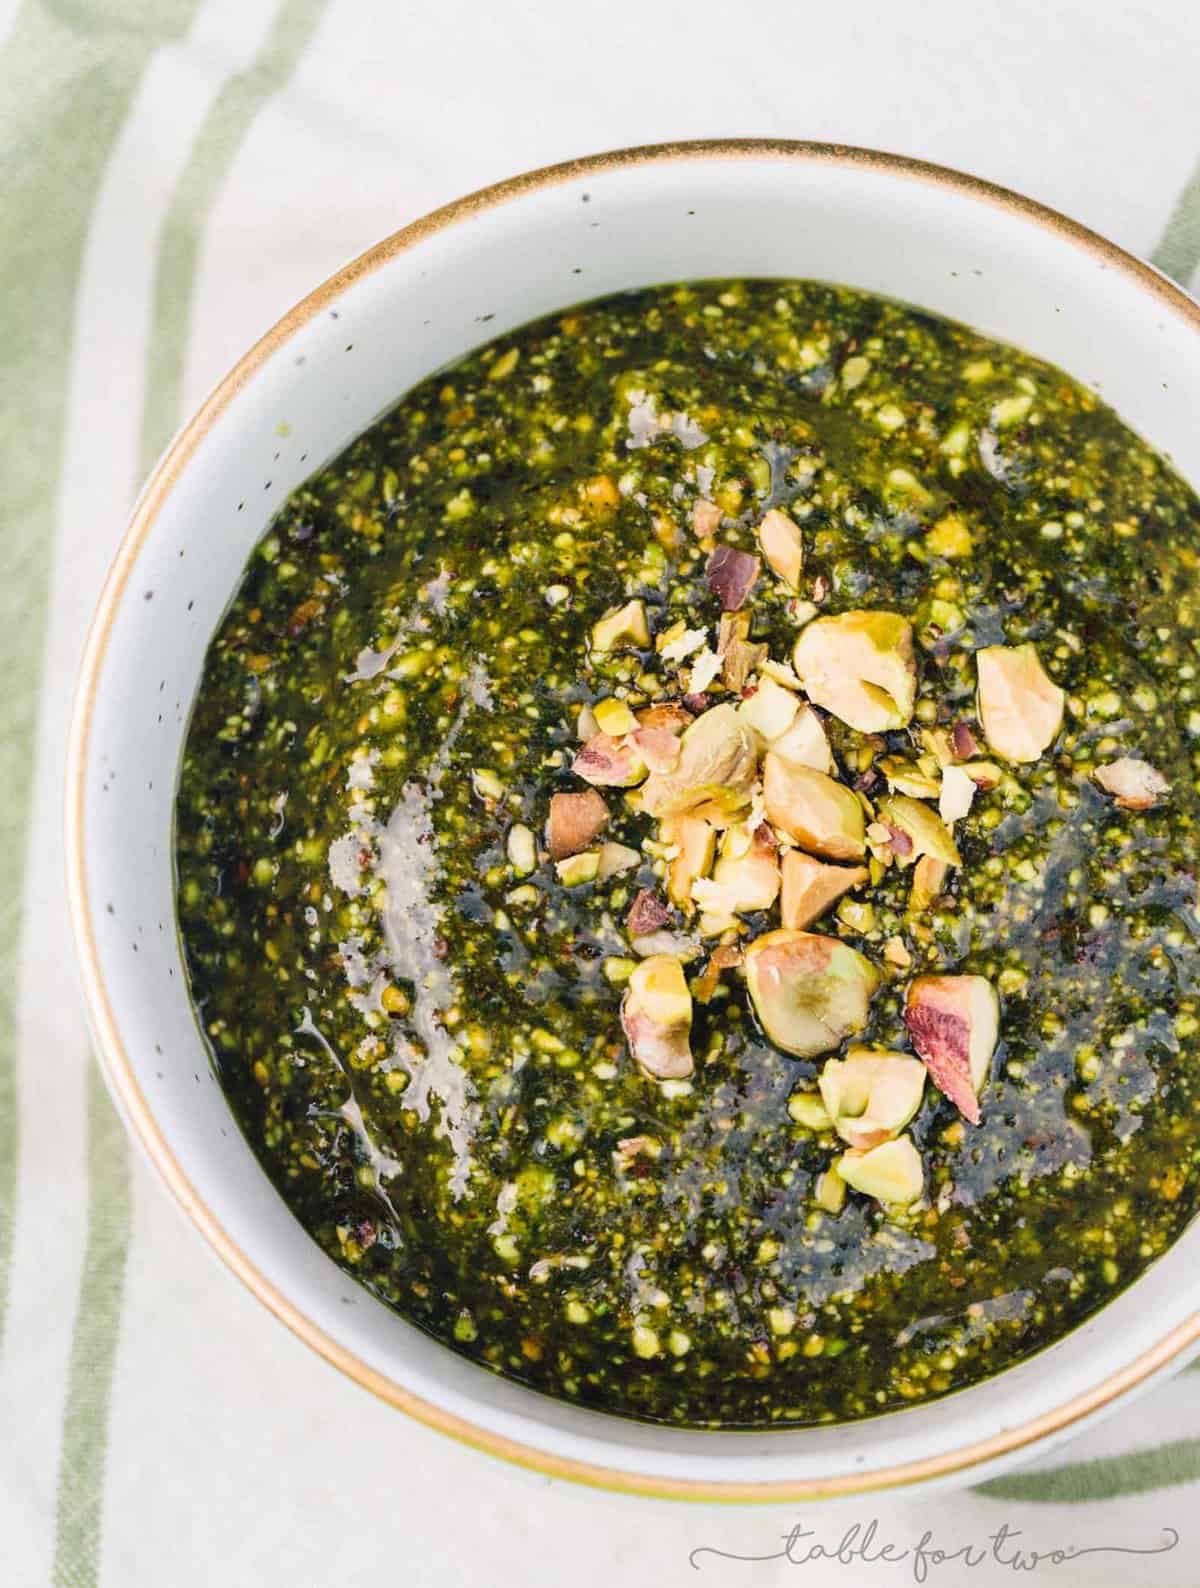 This pistachio mint pesto has so much robust flavor and is a great topping for all grilled meats, pasta, and any sort of dipping or cheese and meat platter!